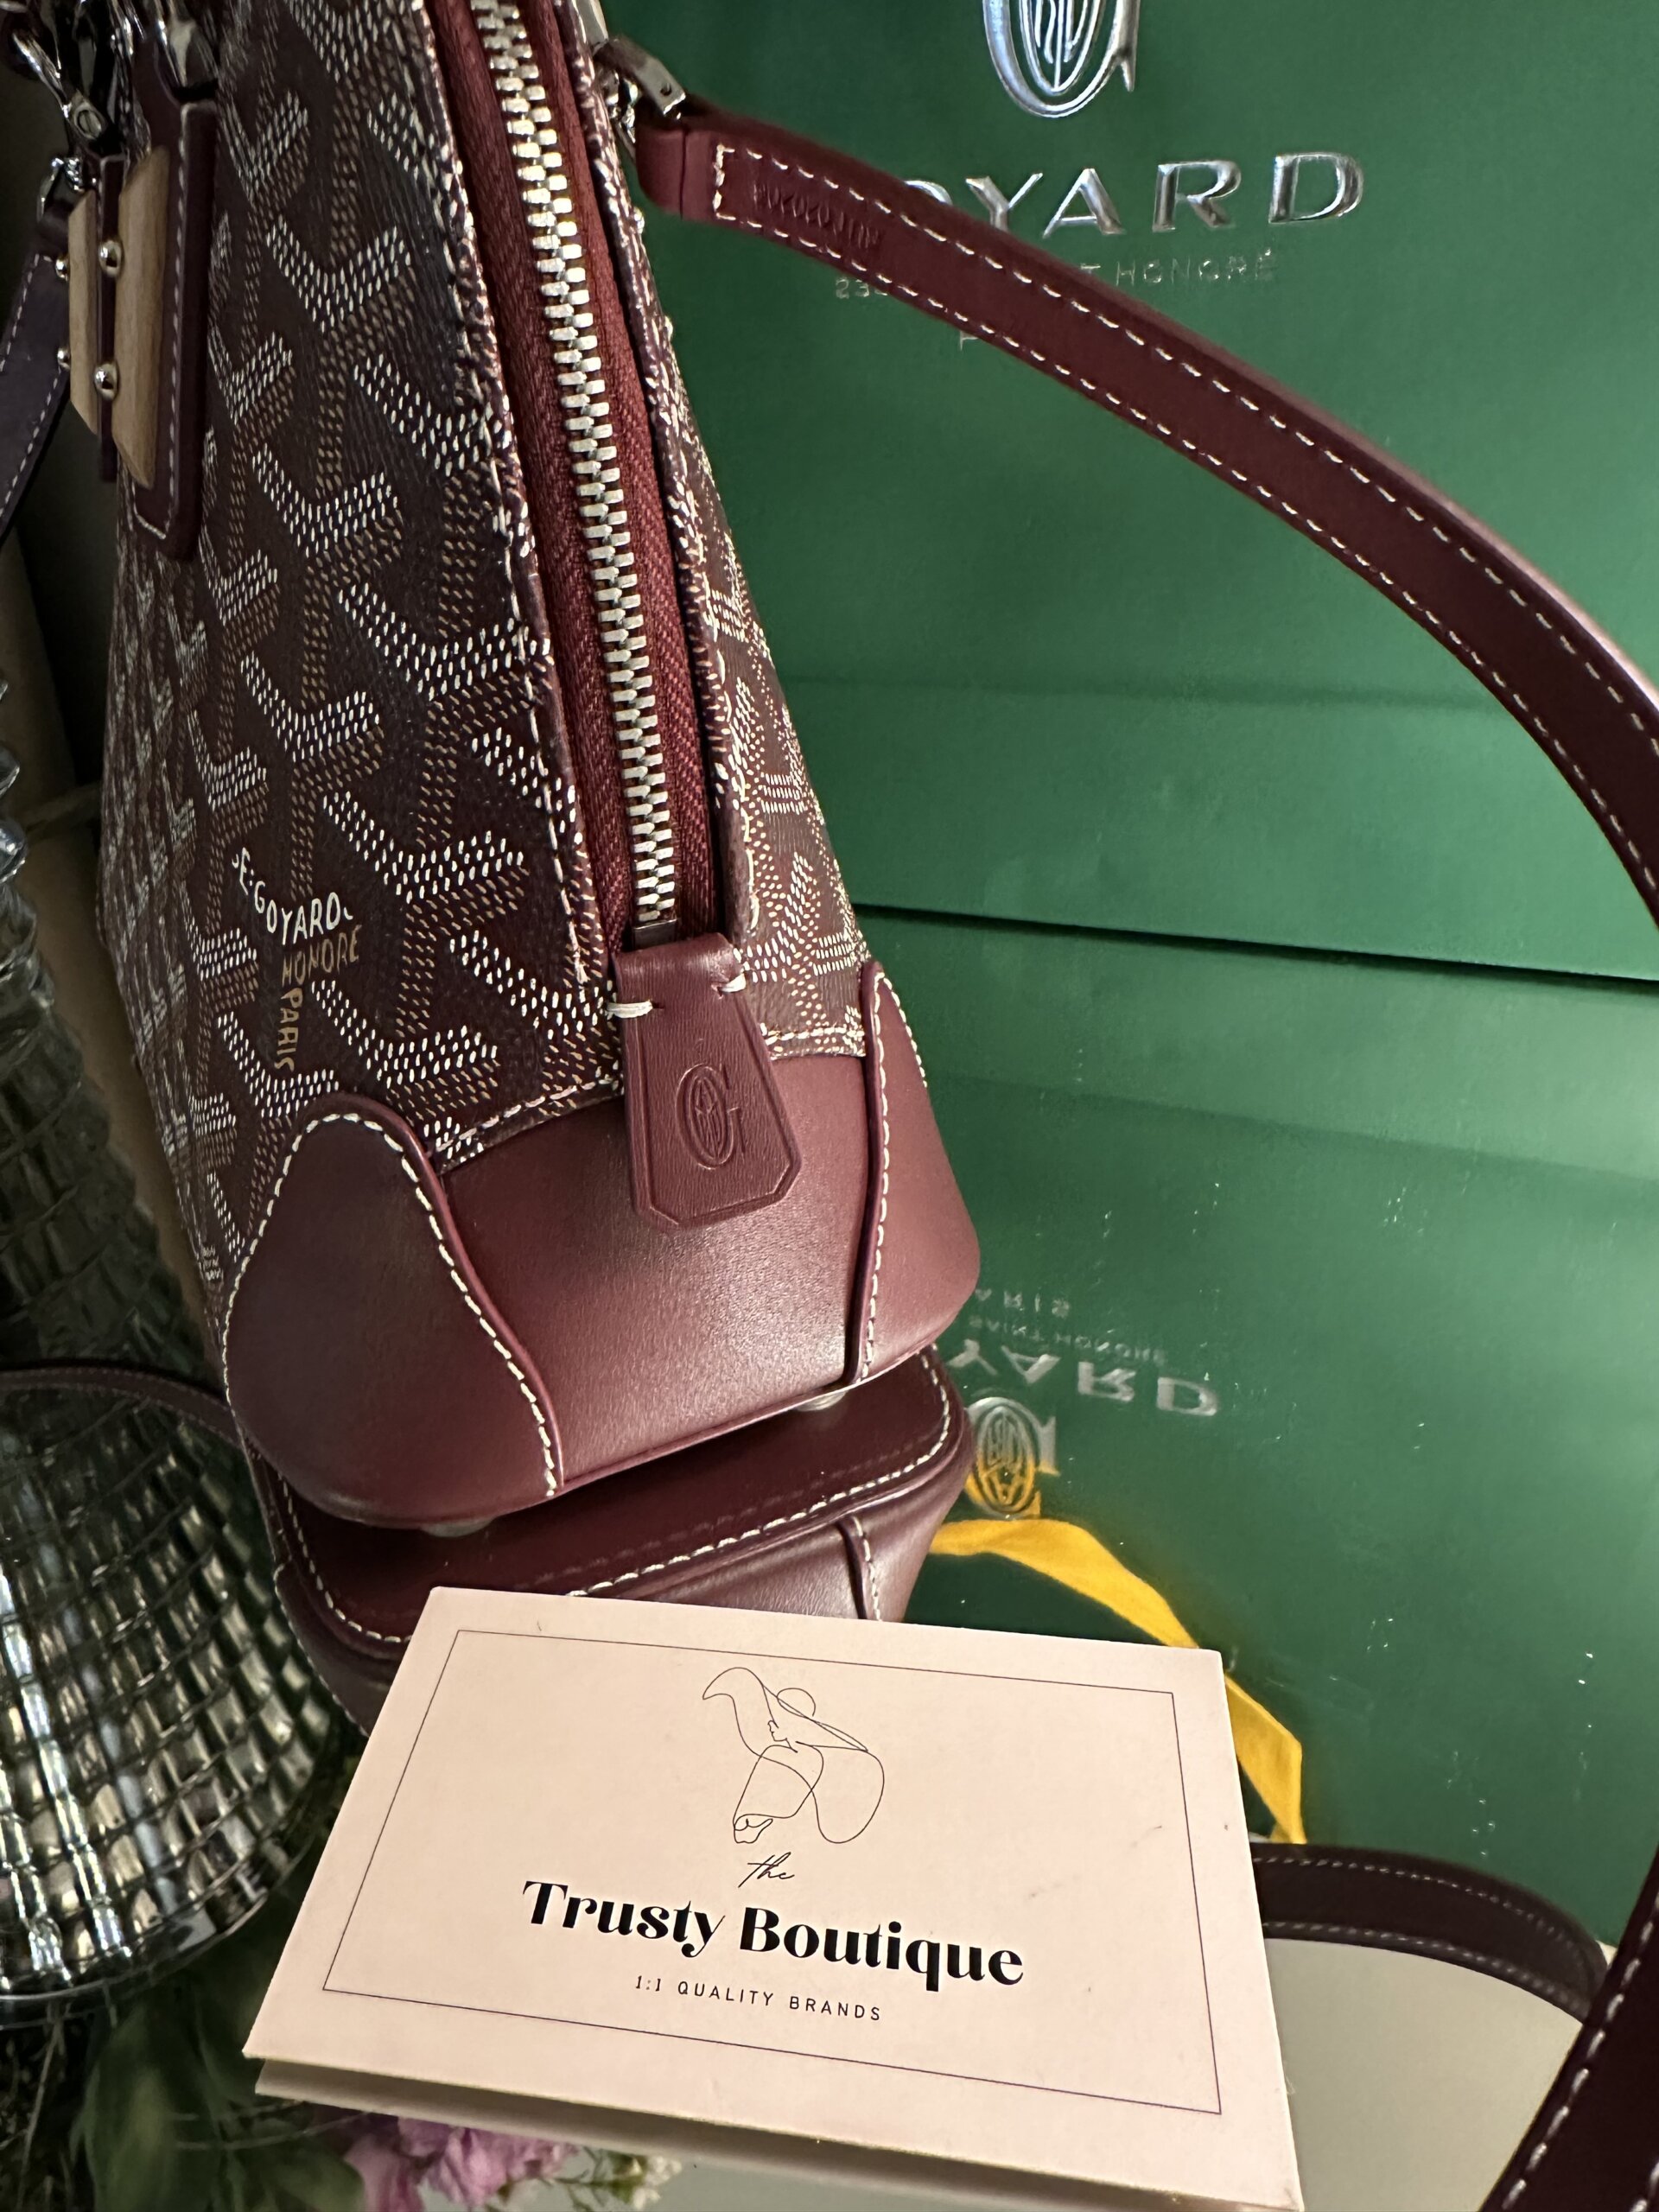 By Appointment UAE - Goyard Reedition Vendome in PM and Mini size